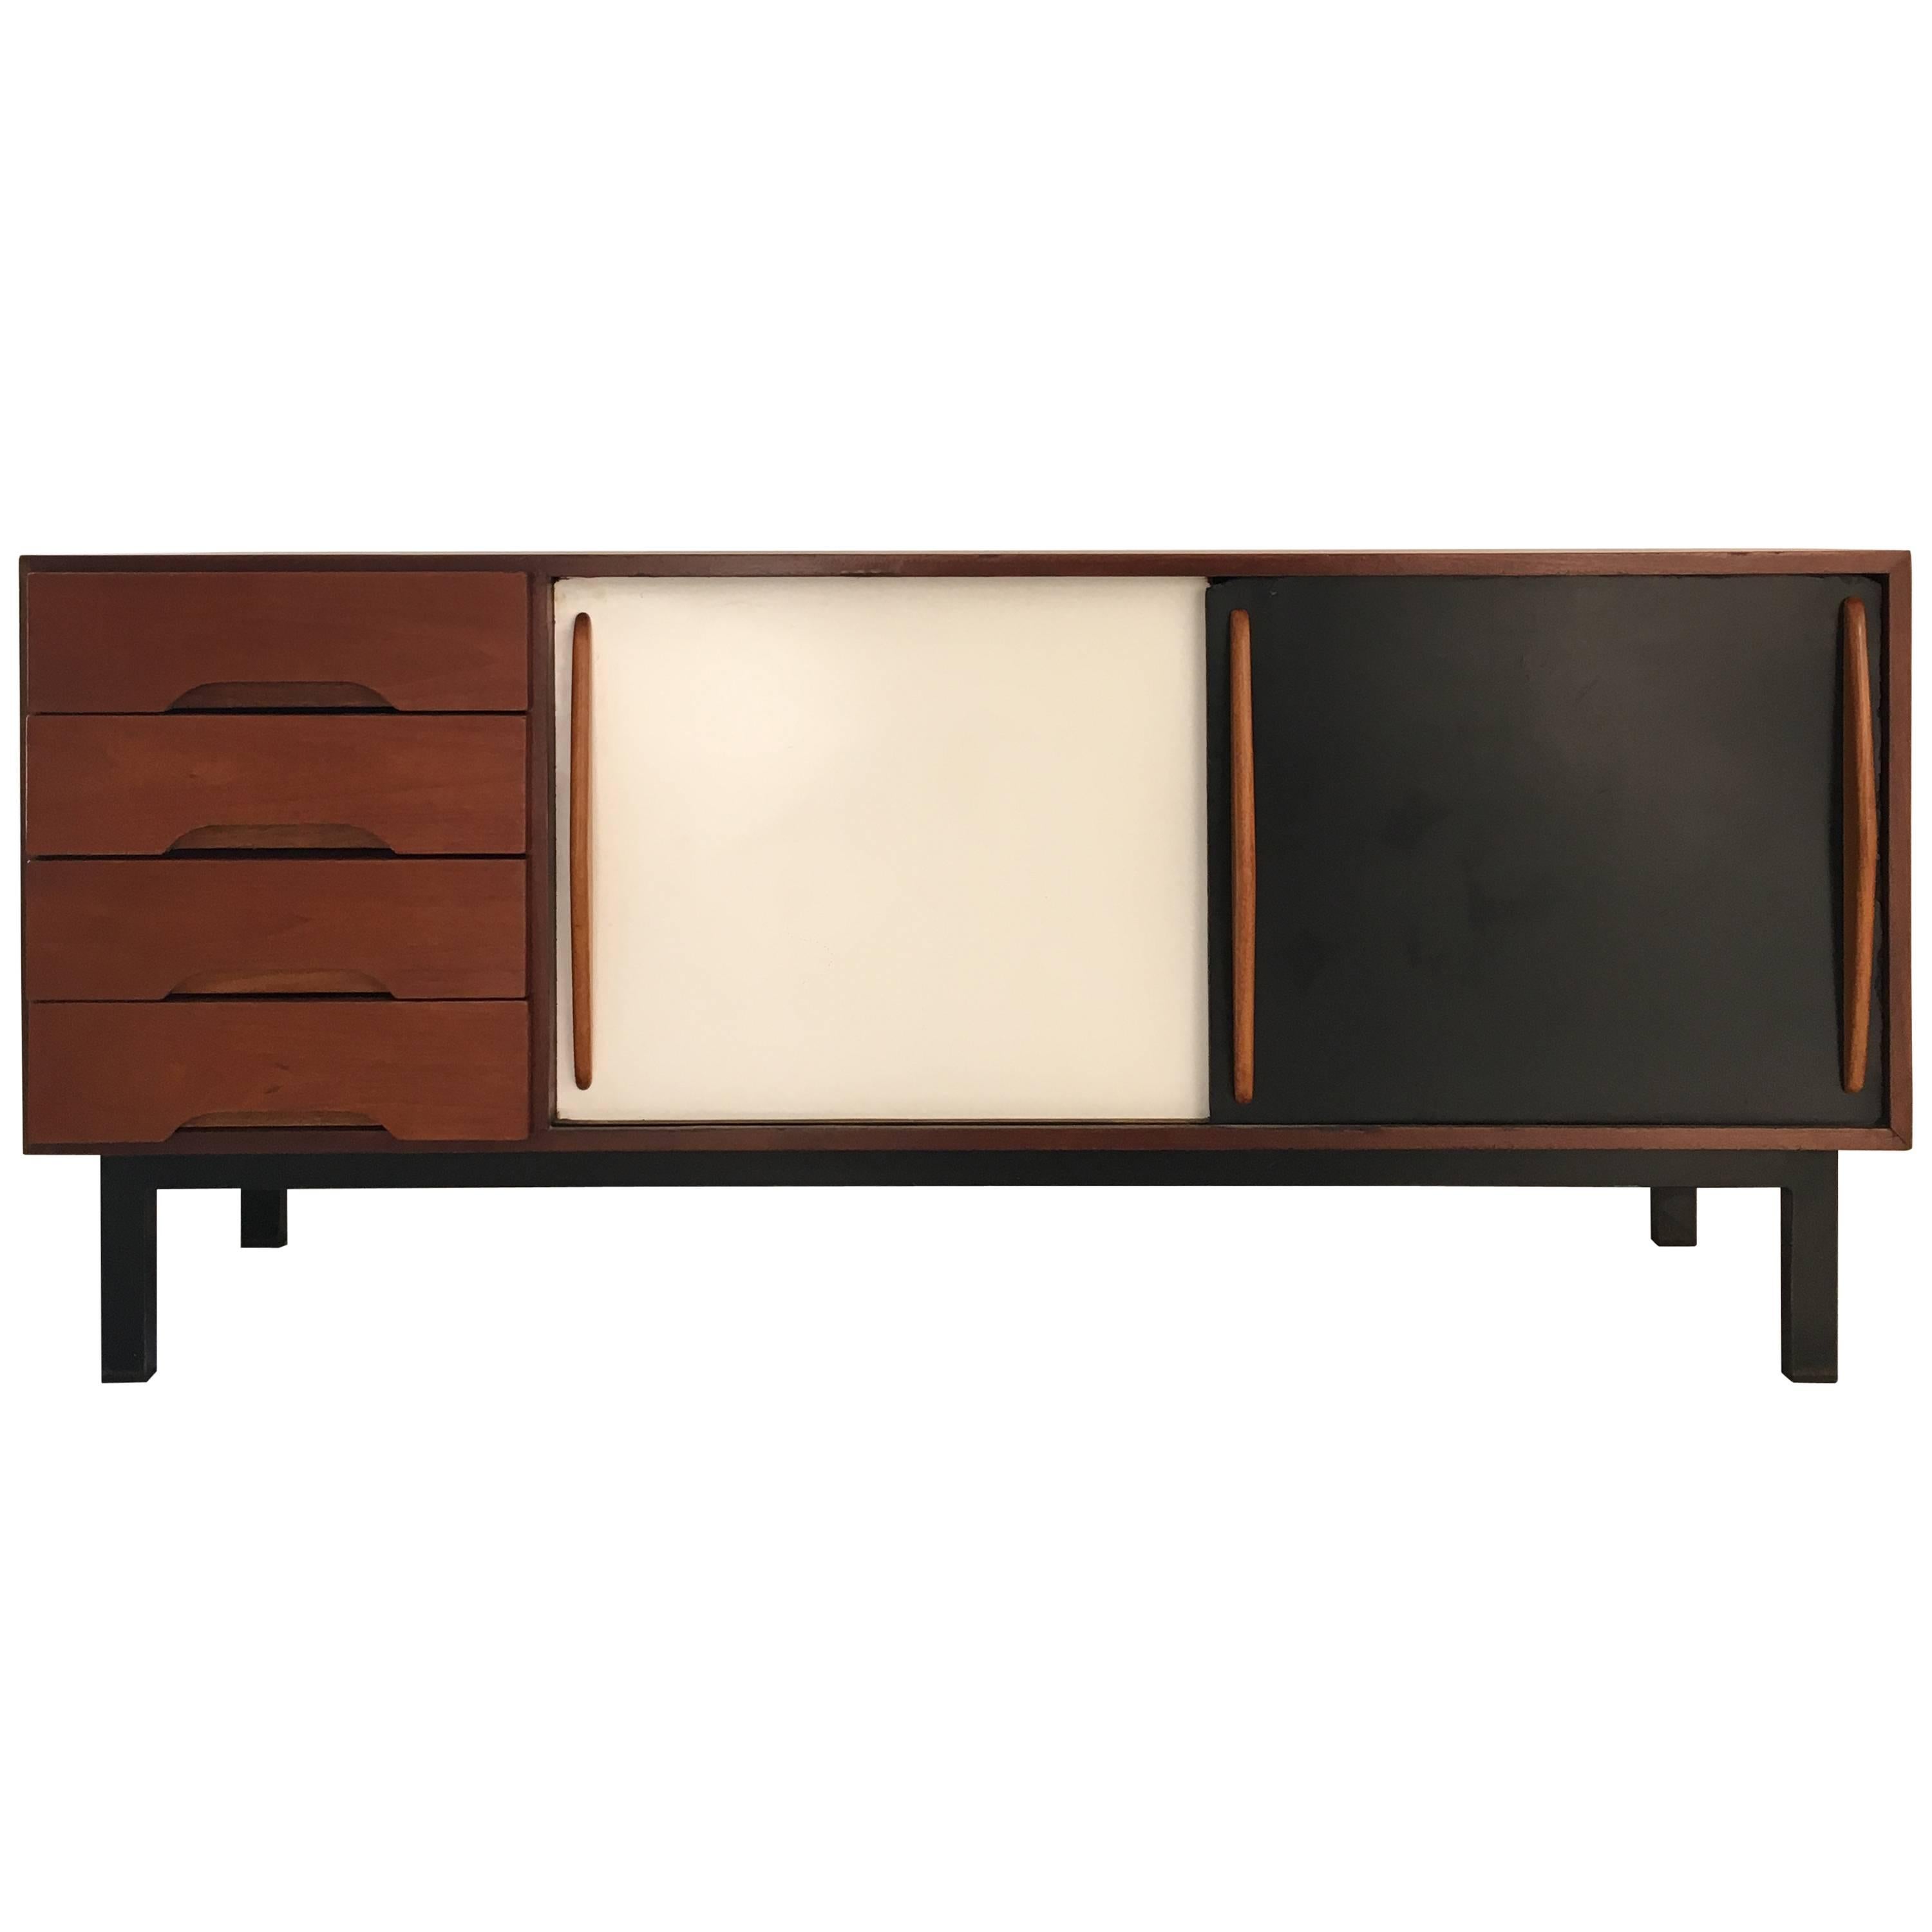 "Cansado" Sideboard by Charlotte Perriand, circa 1950